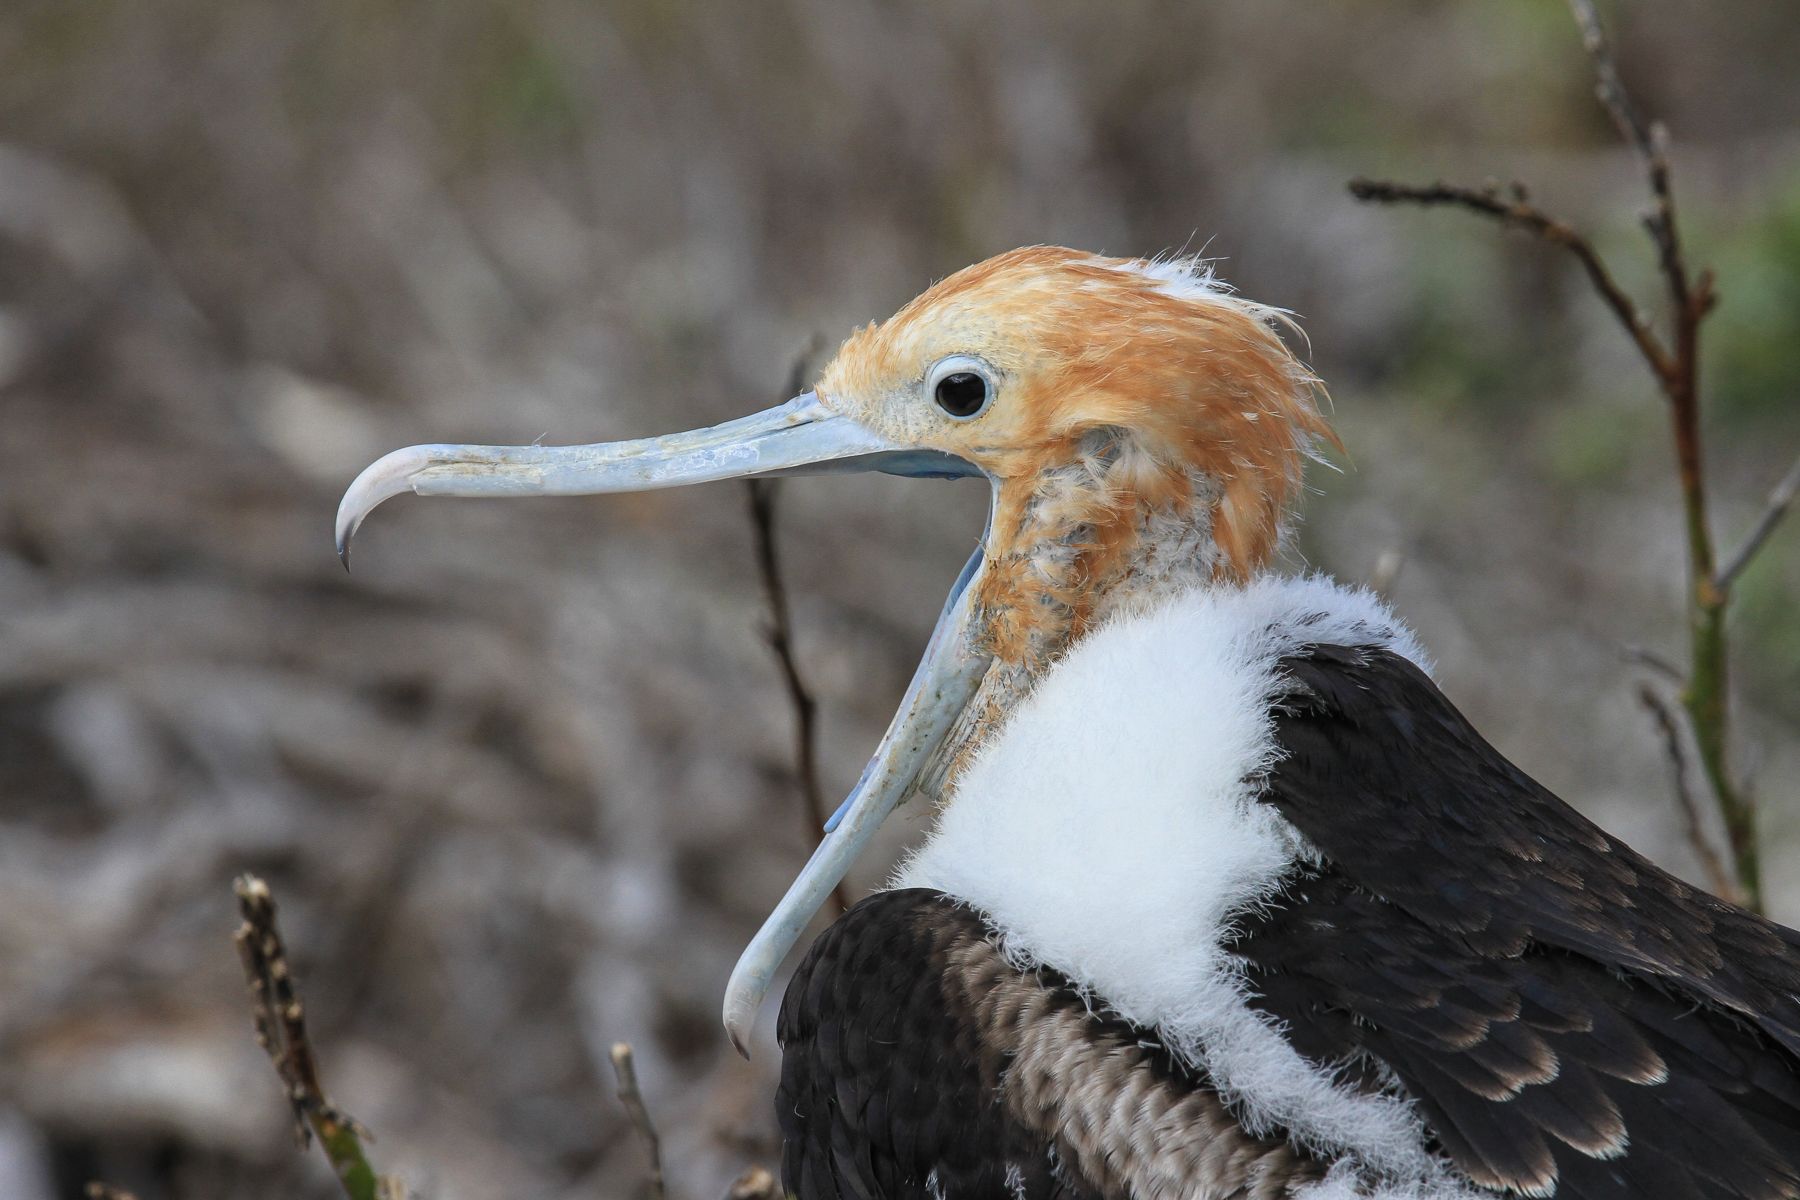 A young Great Frigatebird yawns during the long wait for its next meal